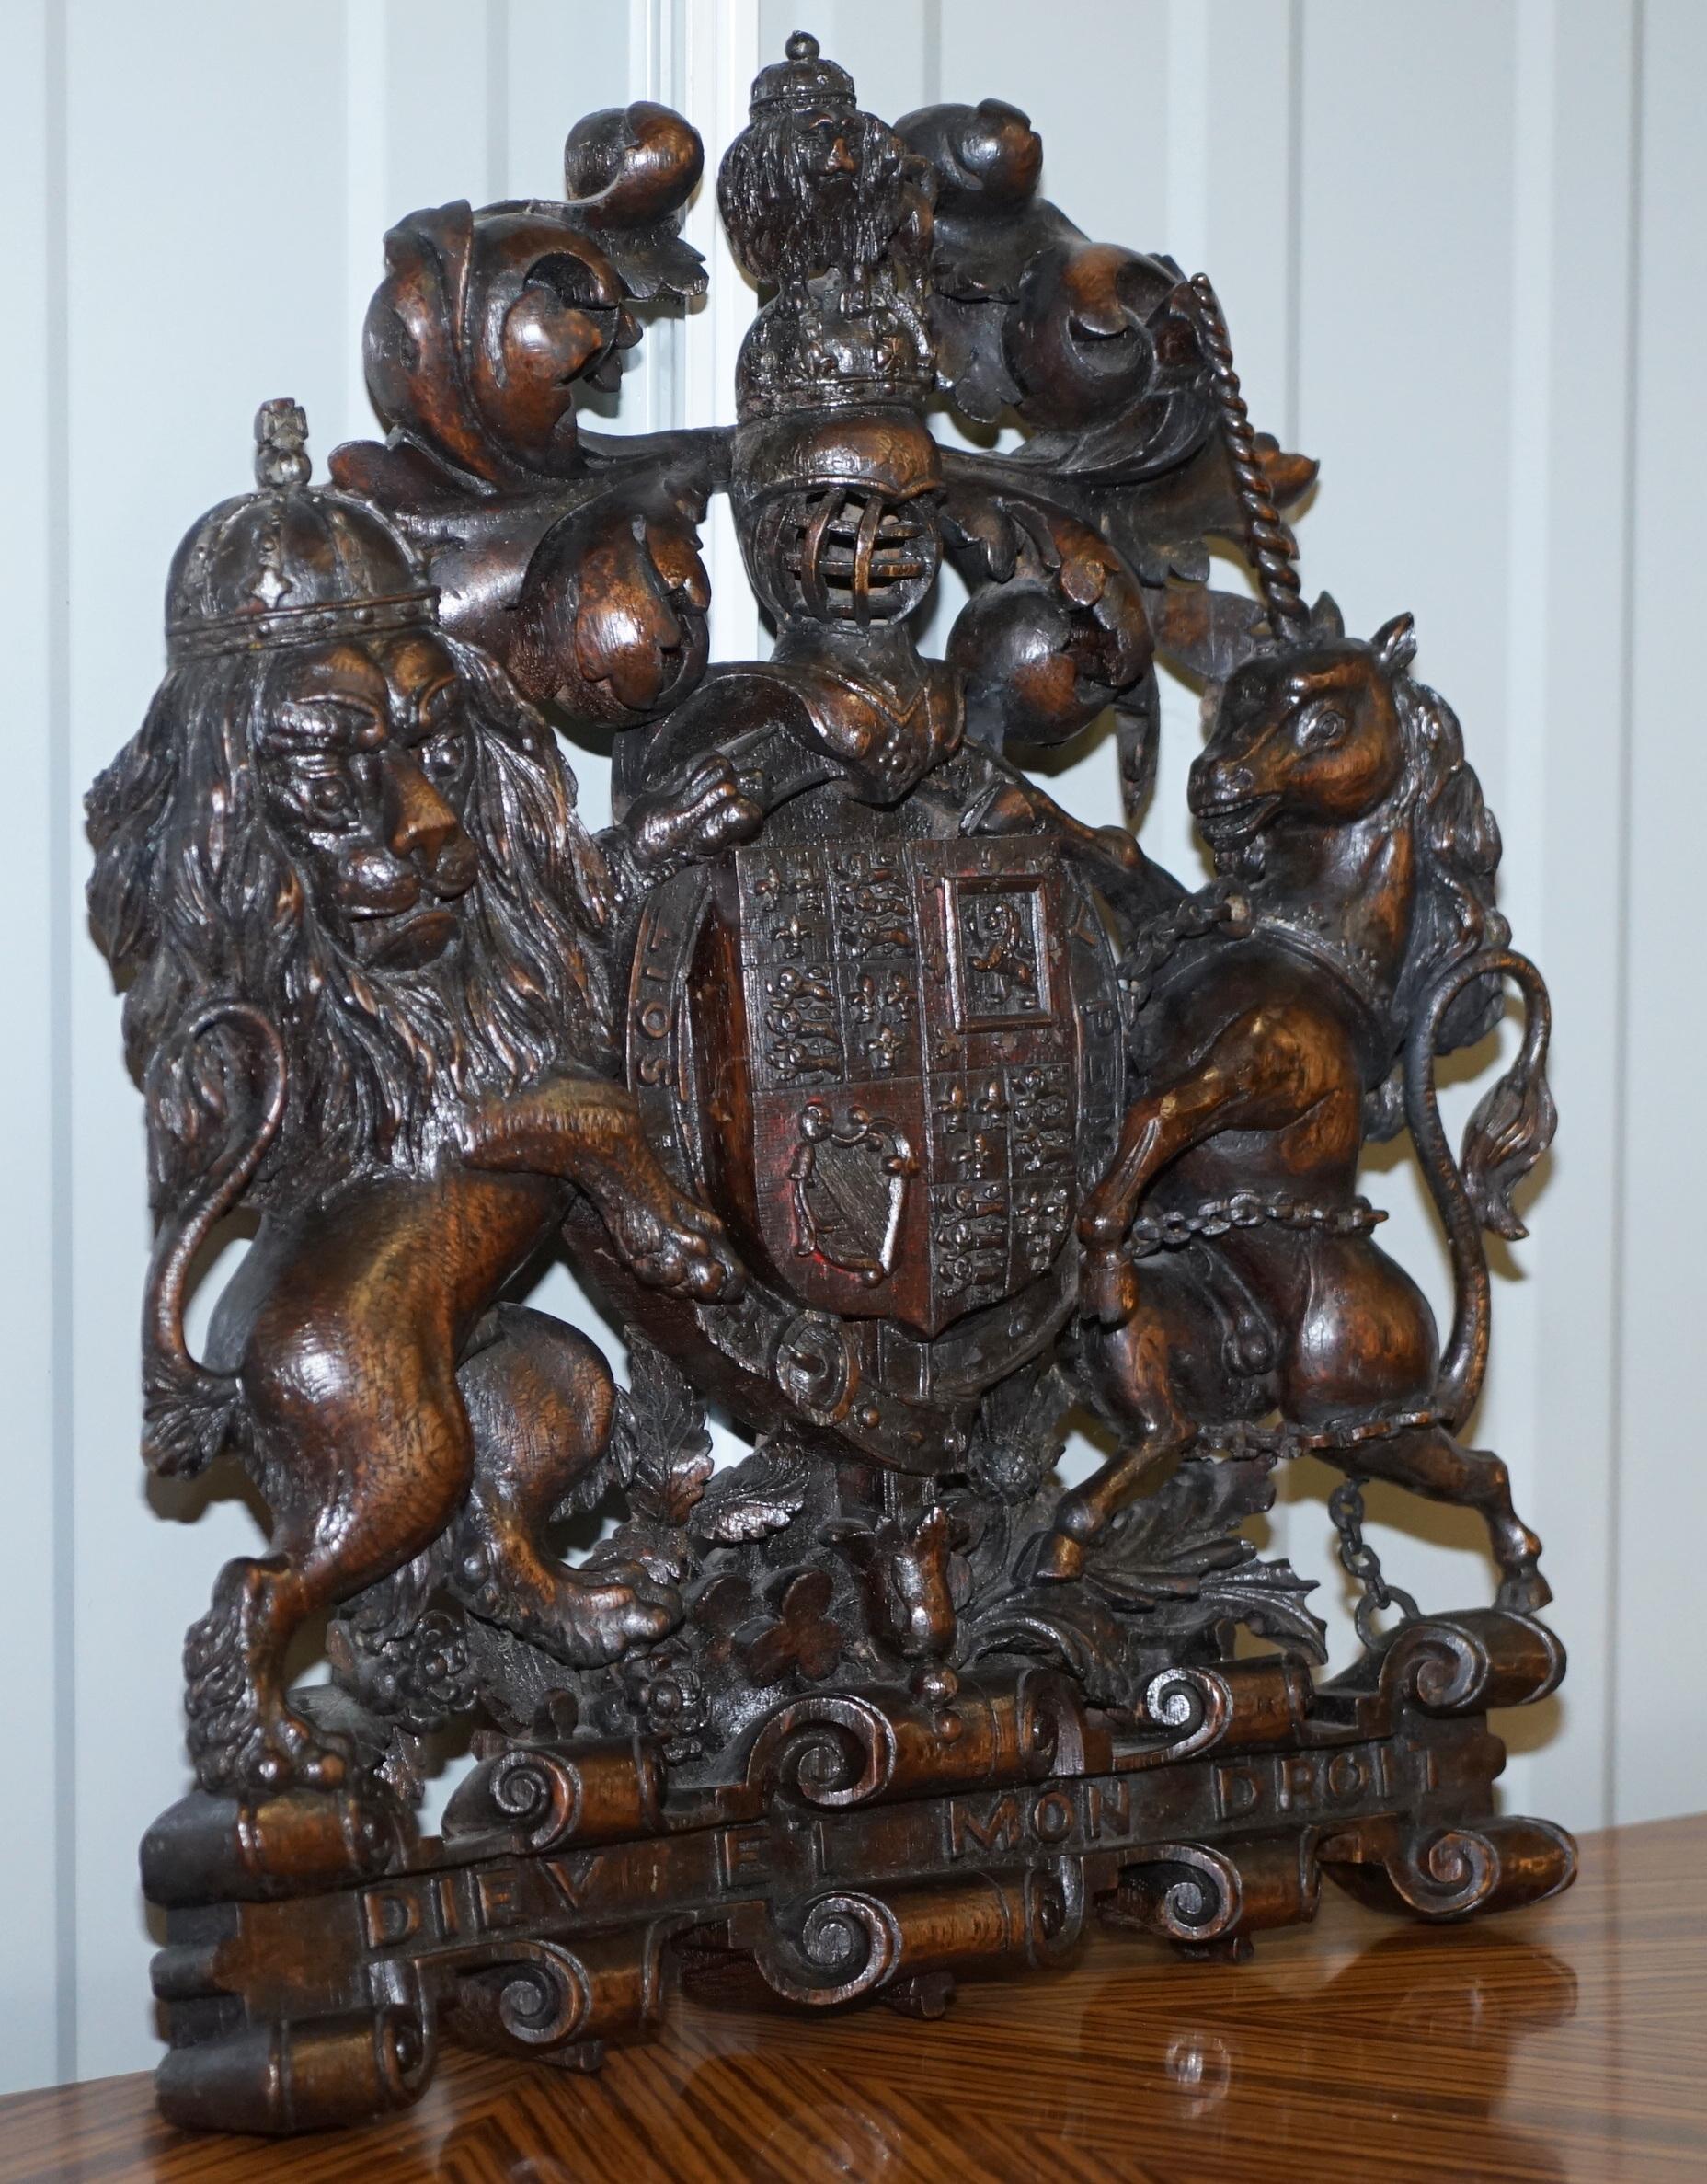 We are delighted to offer for sale this stunning and very rare Charles II English Royal coat of arms hand carved in solid wood, 1660-1685.

A truly sublime piece, I have never seen an armorial crest of this detail and quality before, it is truly